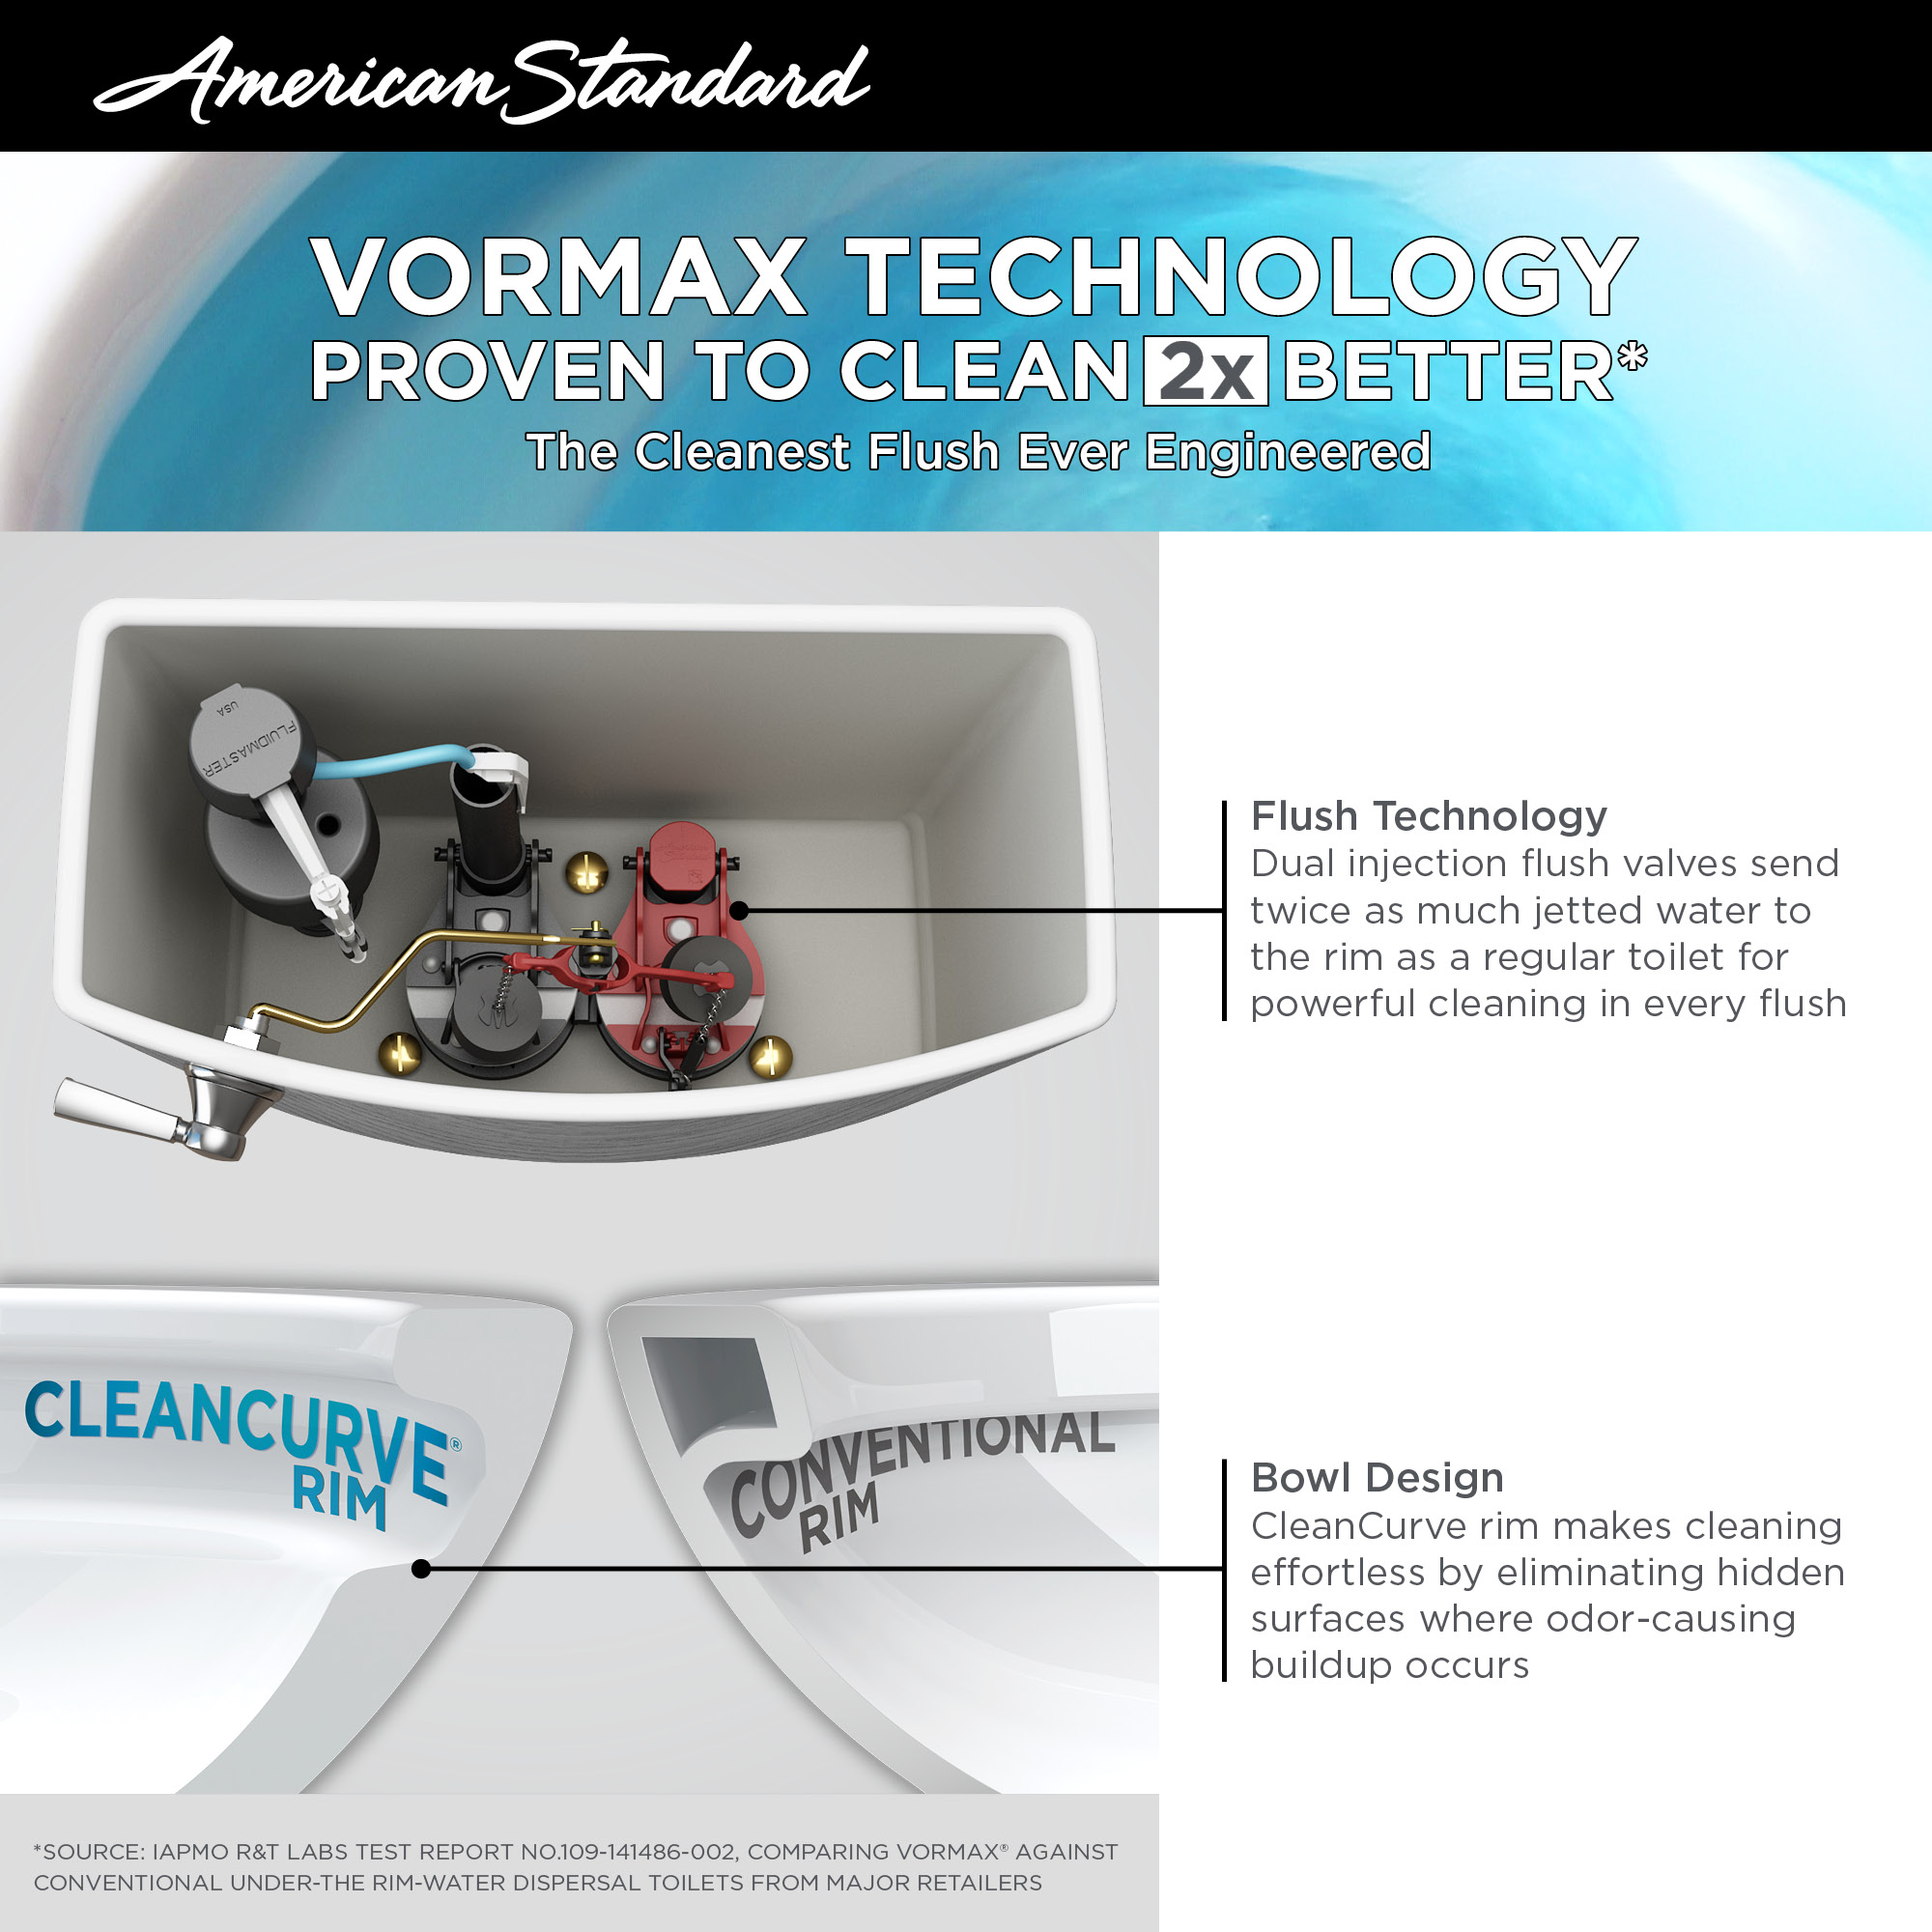 VorMax® Two-Piece 1.28 gpf/4.8 Lpf Chair Height Elongated Toilet Less Seat